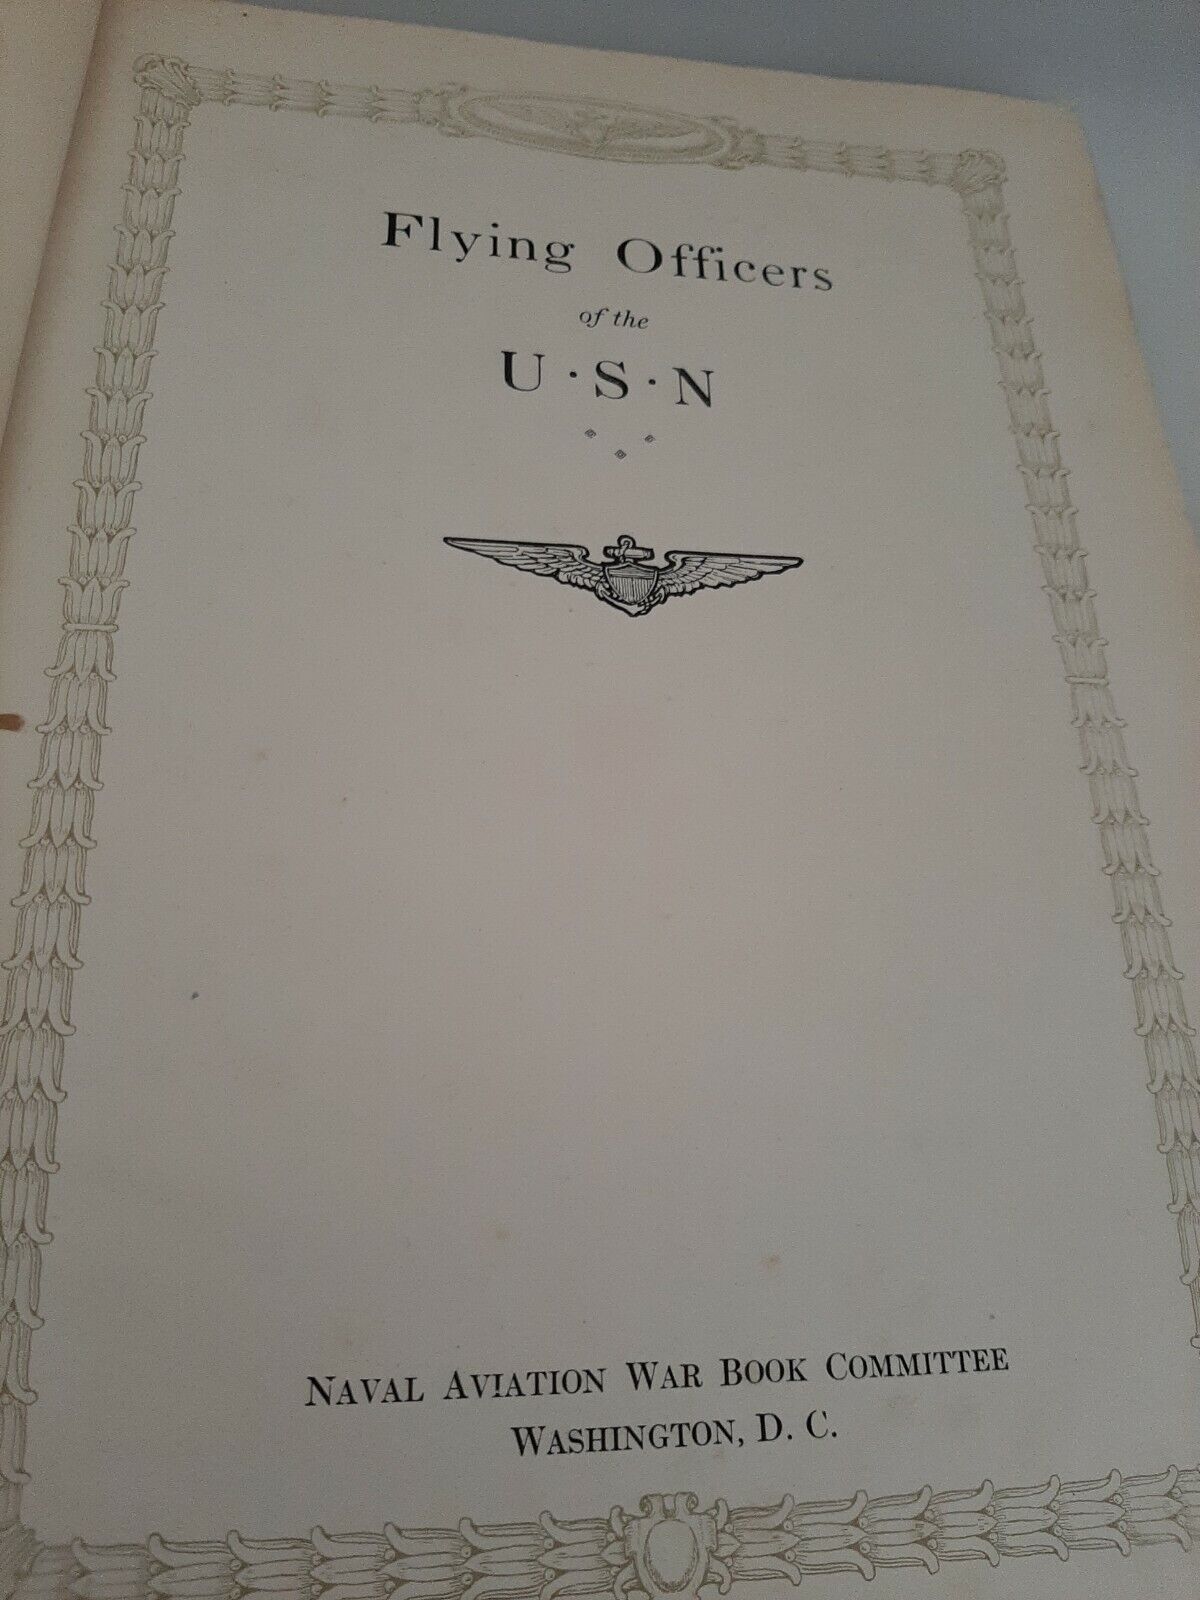 Flying Officers Of The U.S.N Navy 1919 Aviation War Book Committee Roosevelt 